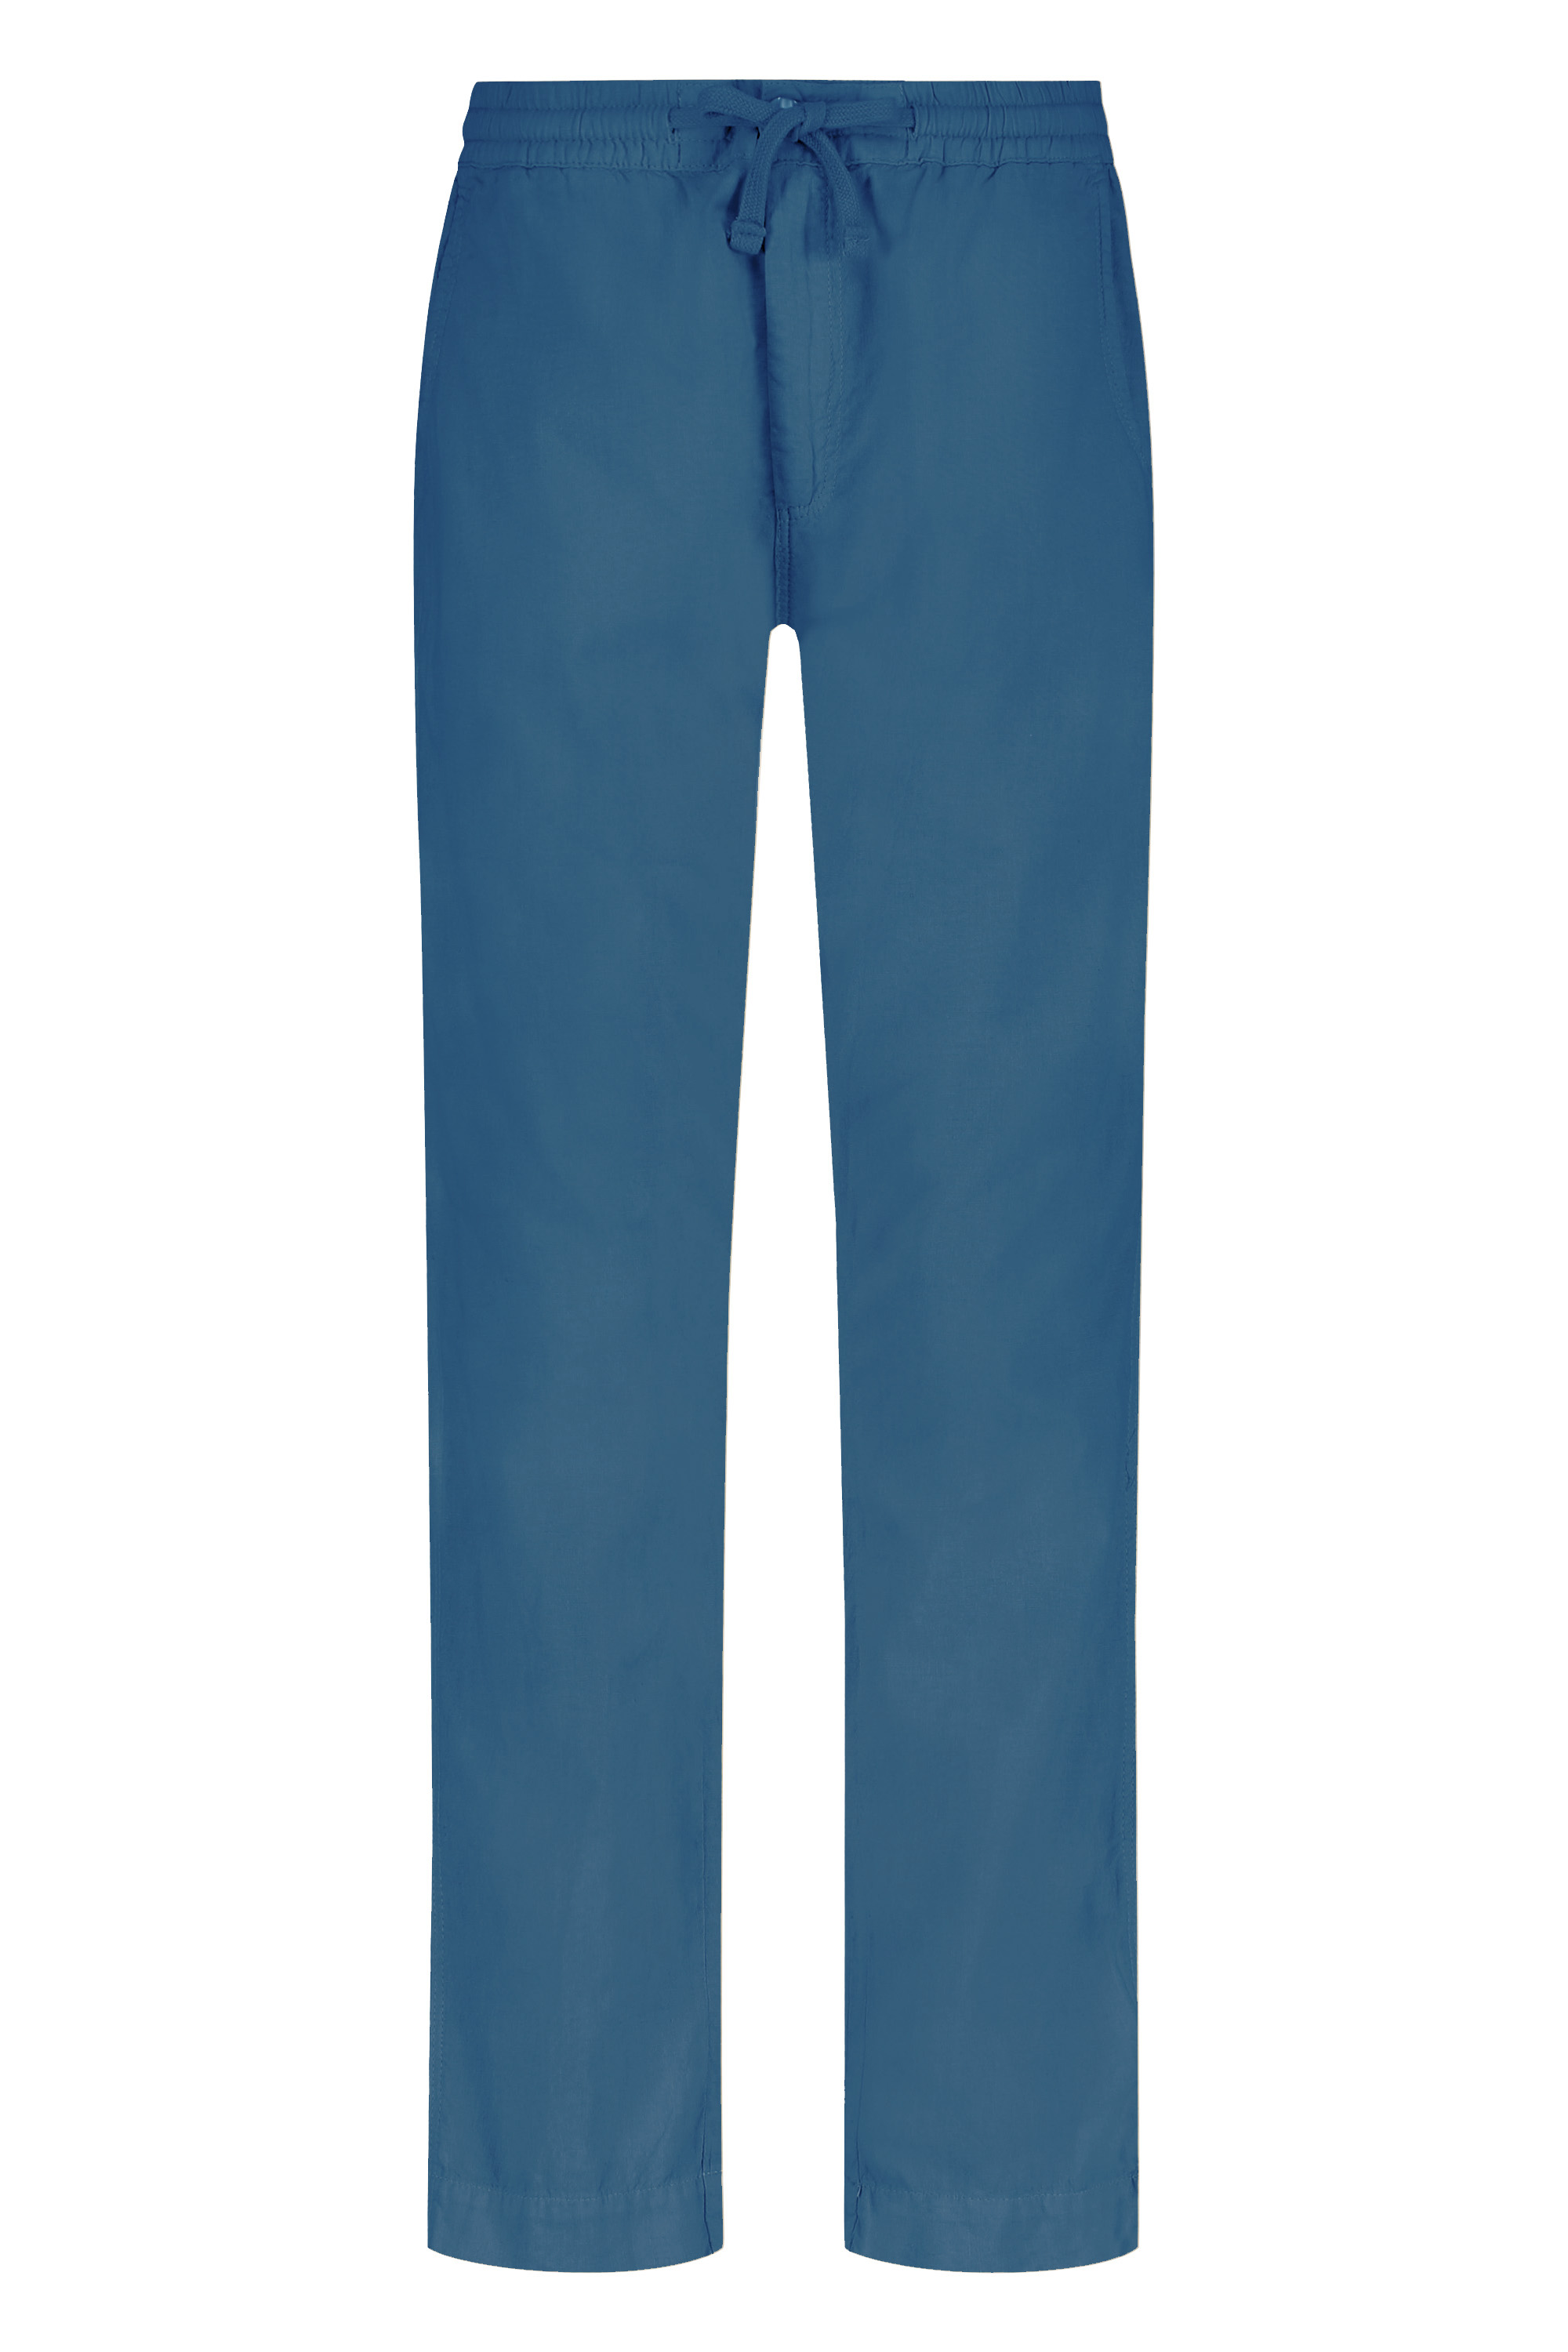 Relaxed Fit Linen Pants Sant Carles Indigo – Blue